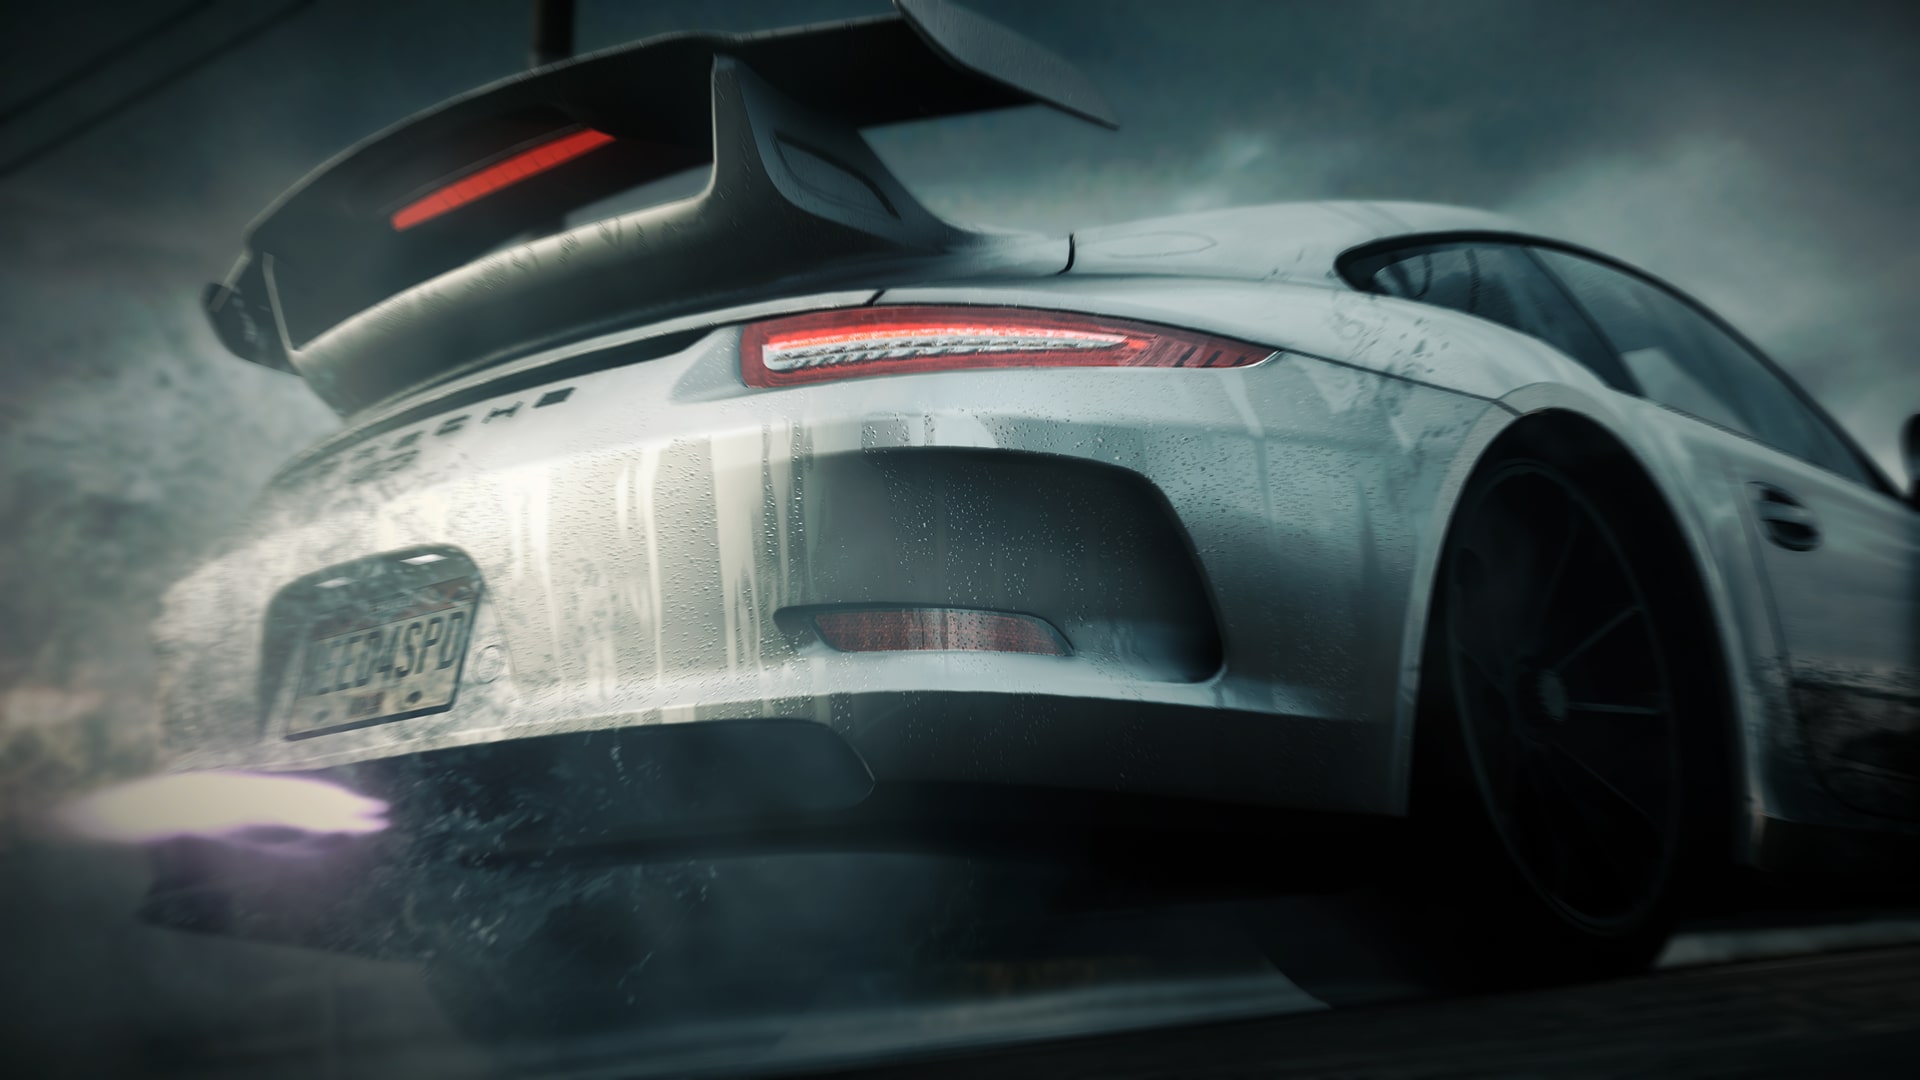 Need for Speed: Rivals now a PS4 launch title in North America